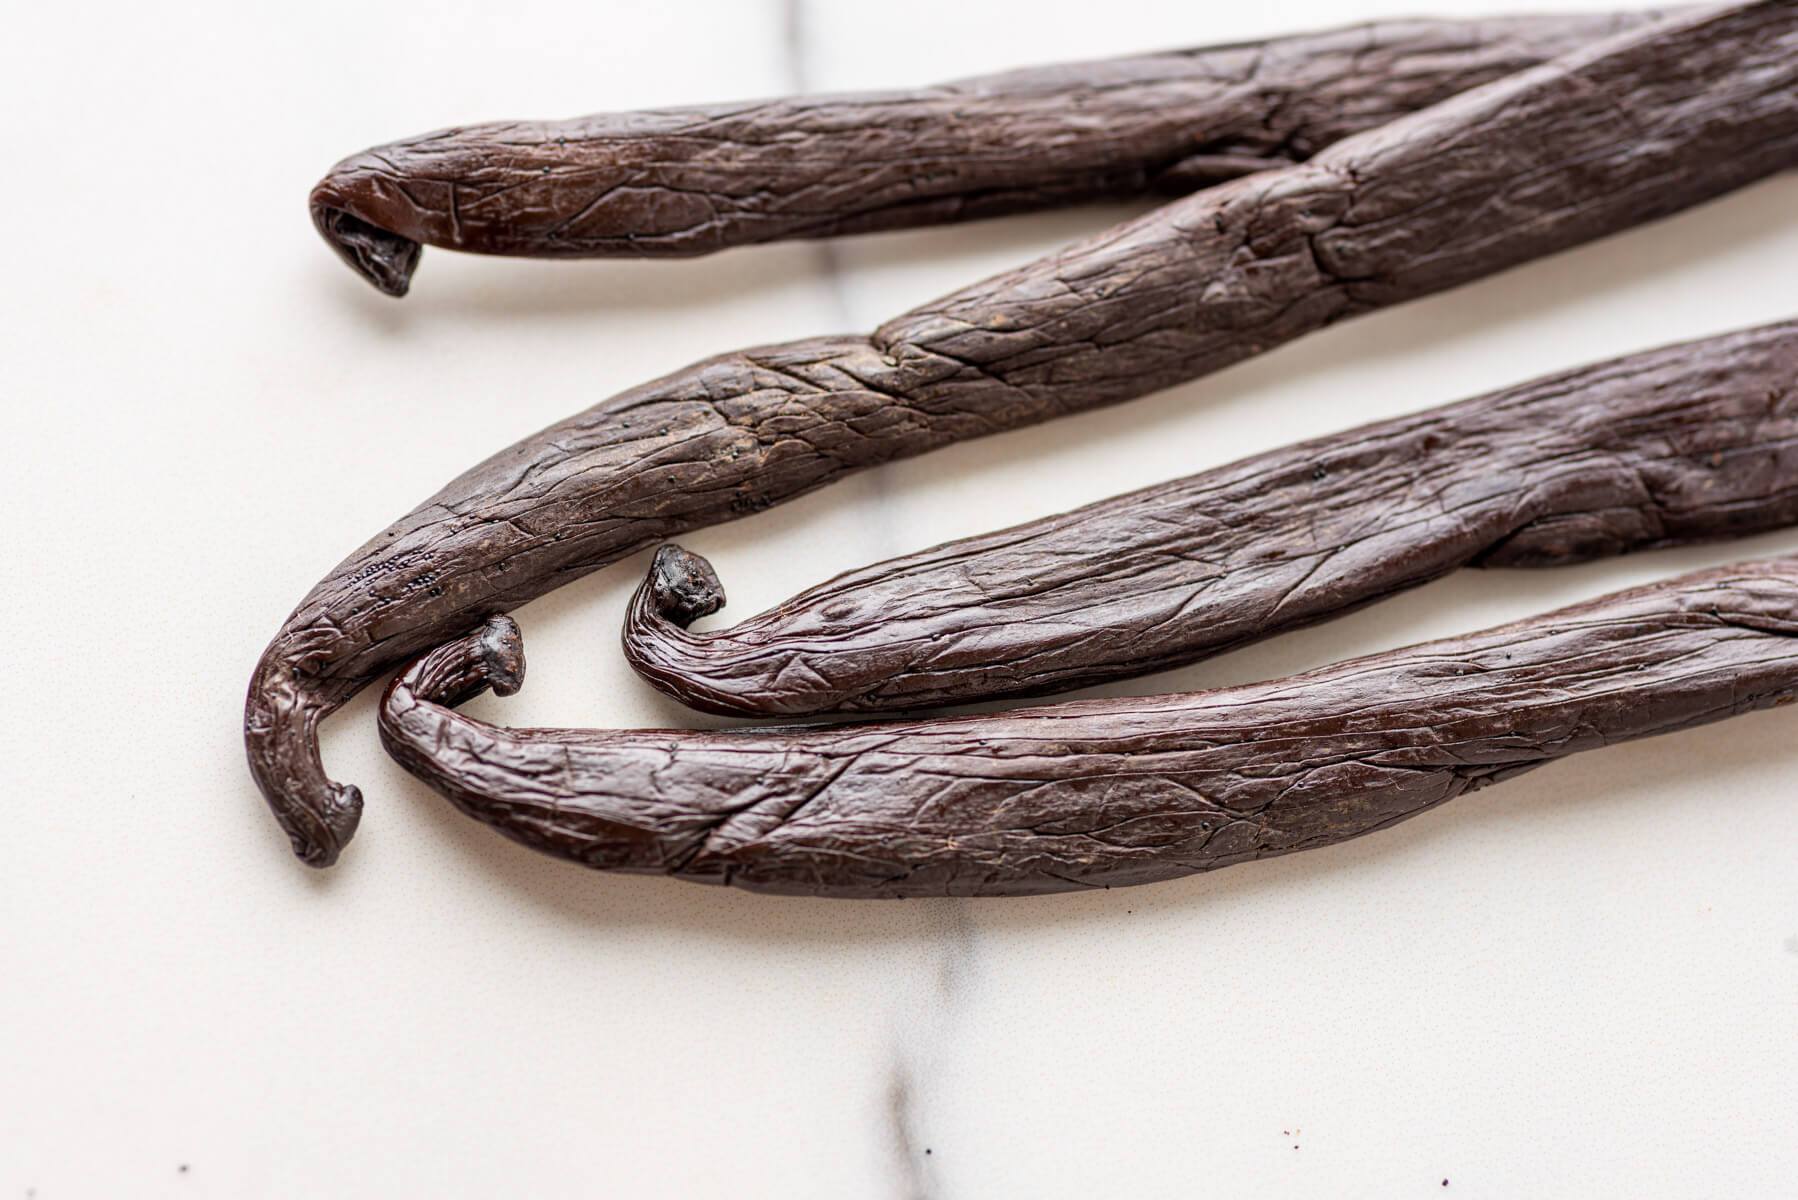 An introduction to vanilla and different types of vanilla beans